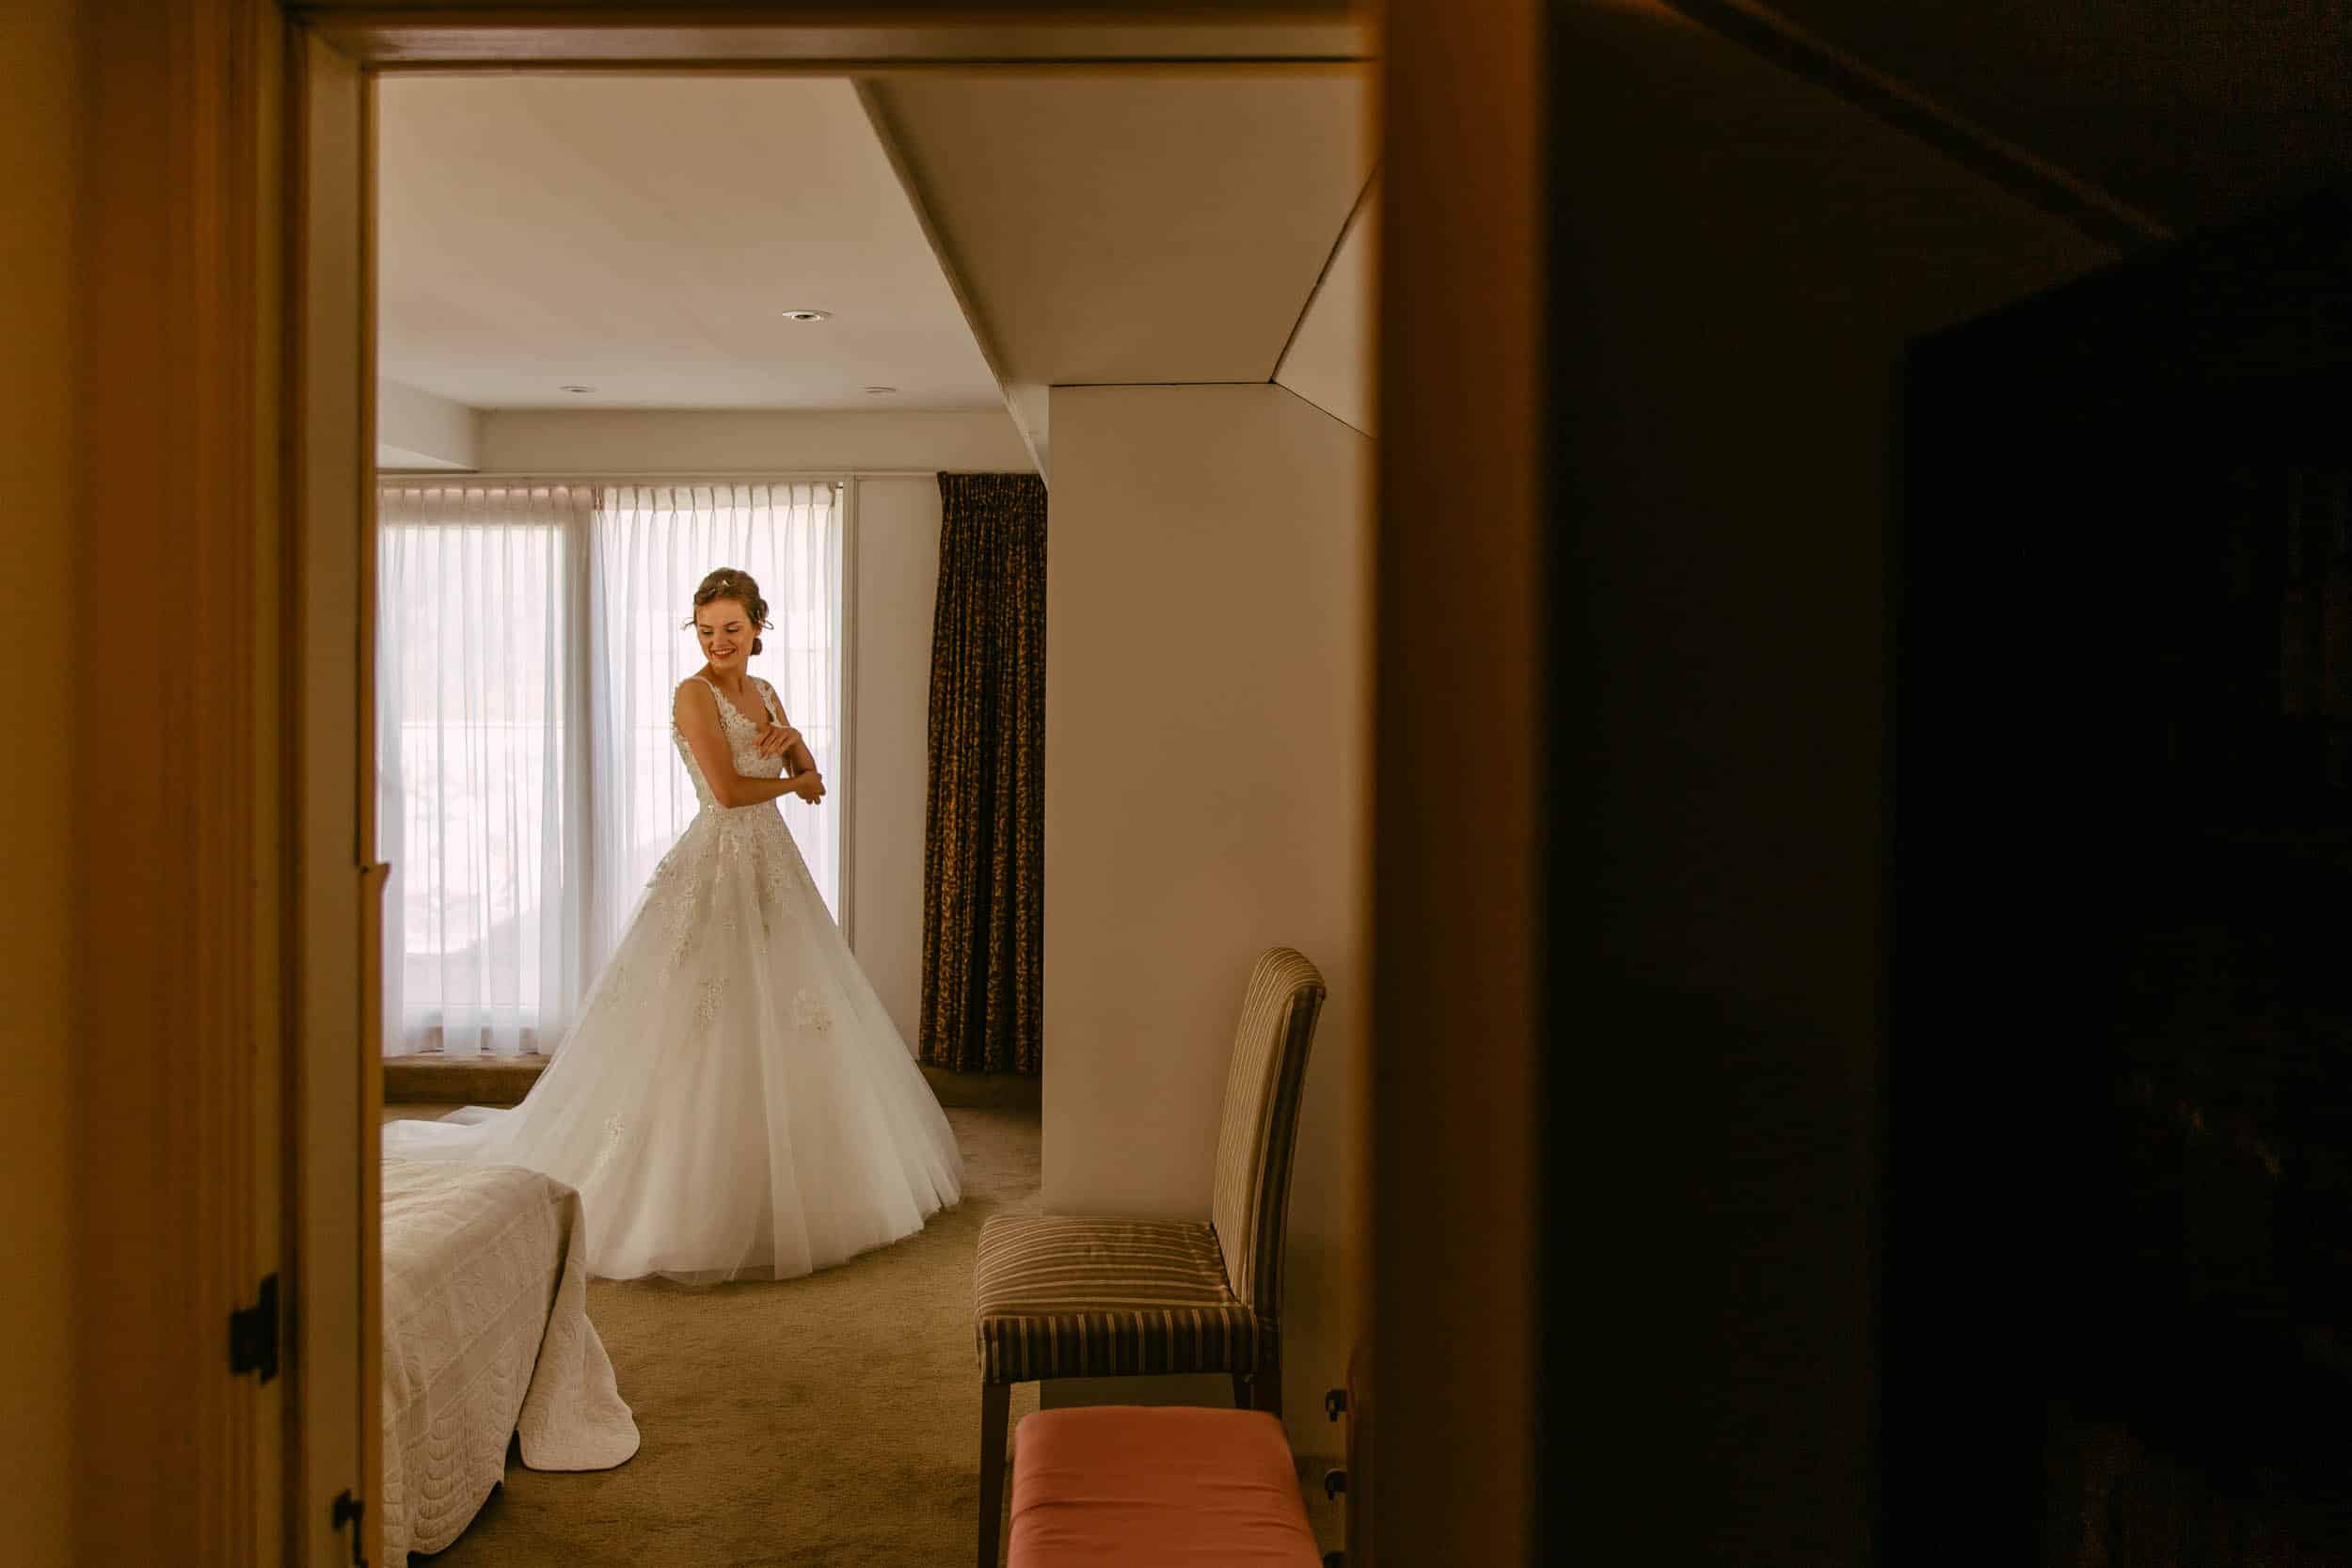 A bride in wedding dress stands in the doorway of a hotel room, ready for her wedding at the botanical garden delft.